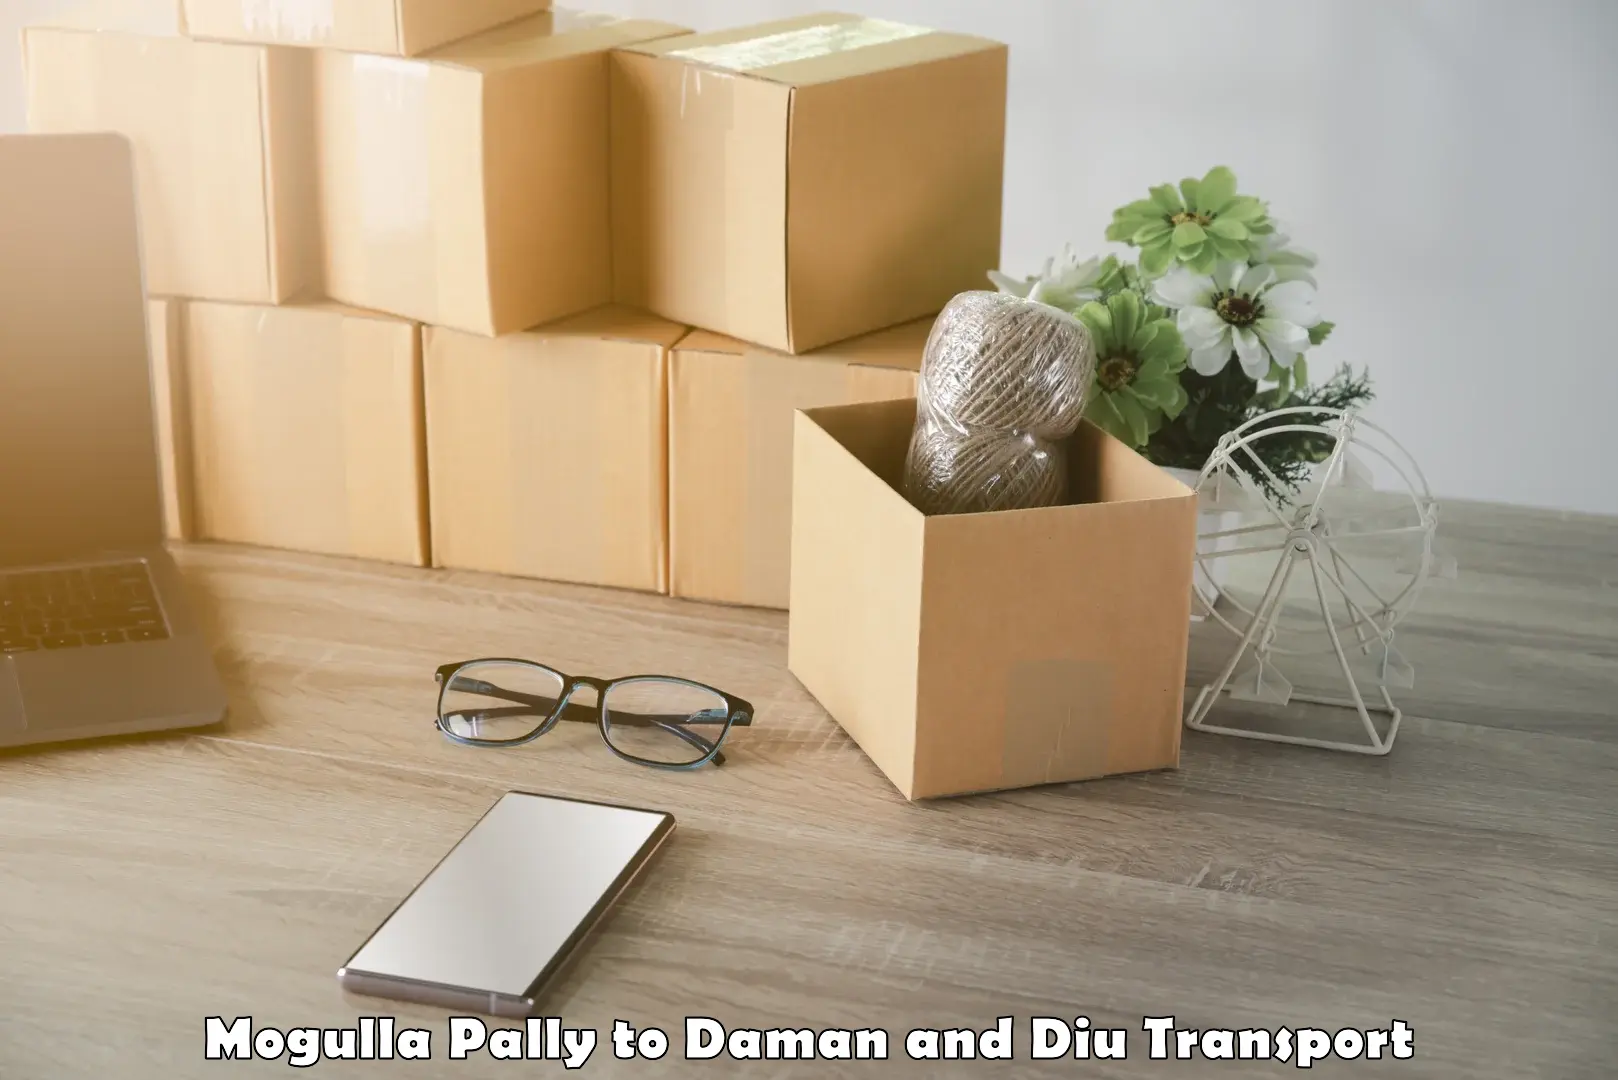 Domestic transport services Mogulla Pally to Daman and Diu